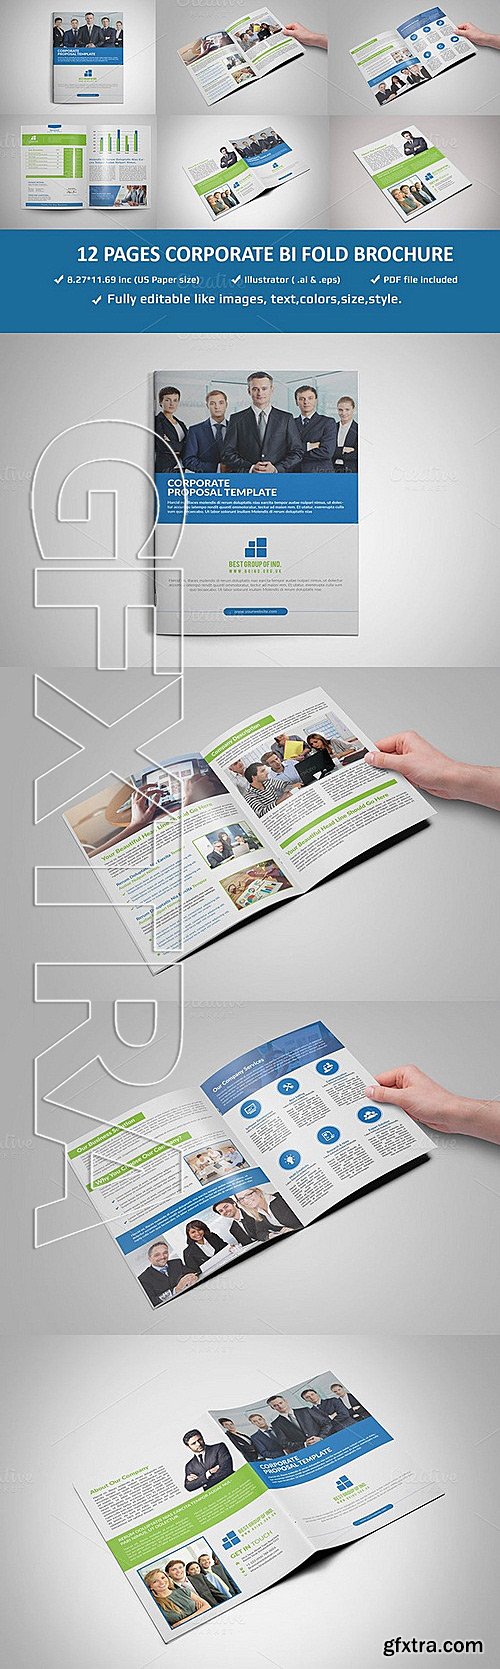 CM - 12 Pages Corporate Brochure Template 306018